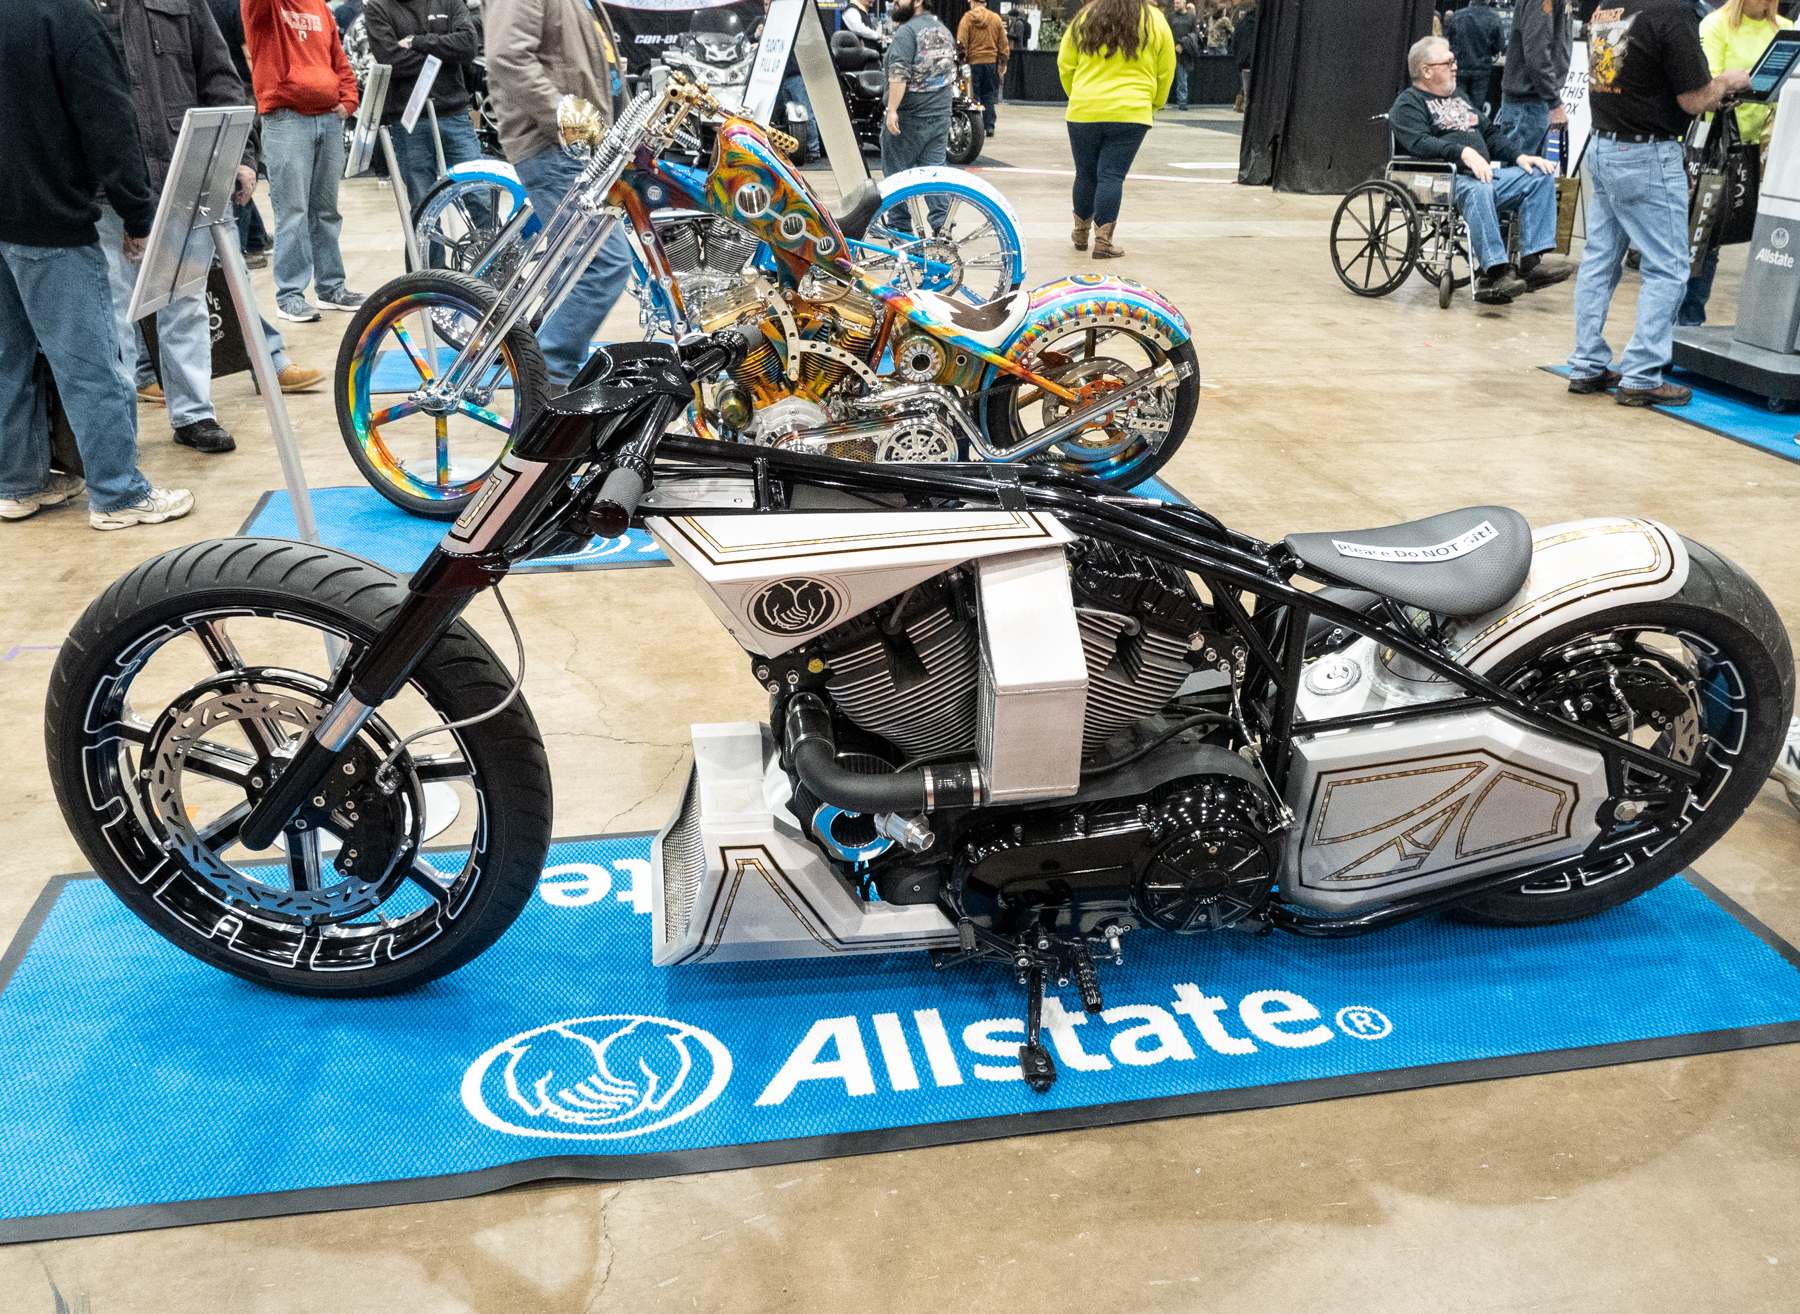 cleveland motorcycle show13 International Motorcycle Shows 2019 in Cleveland